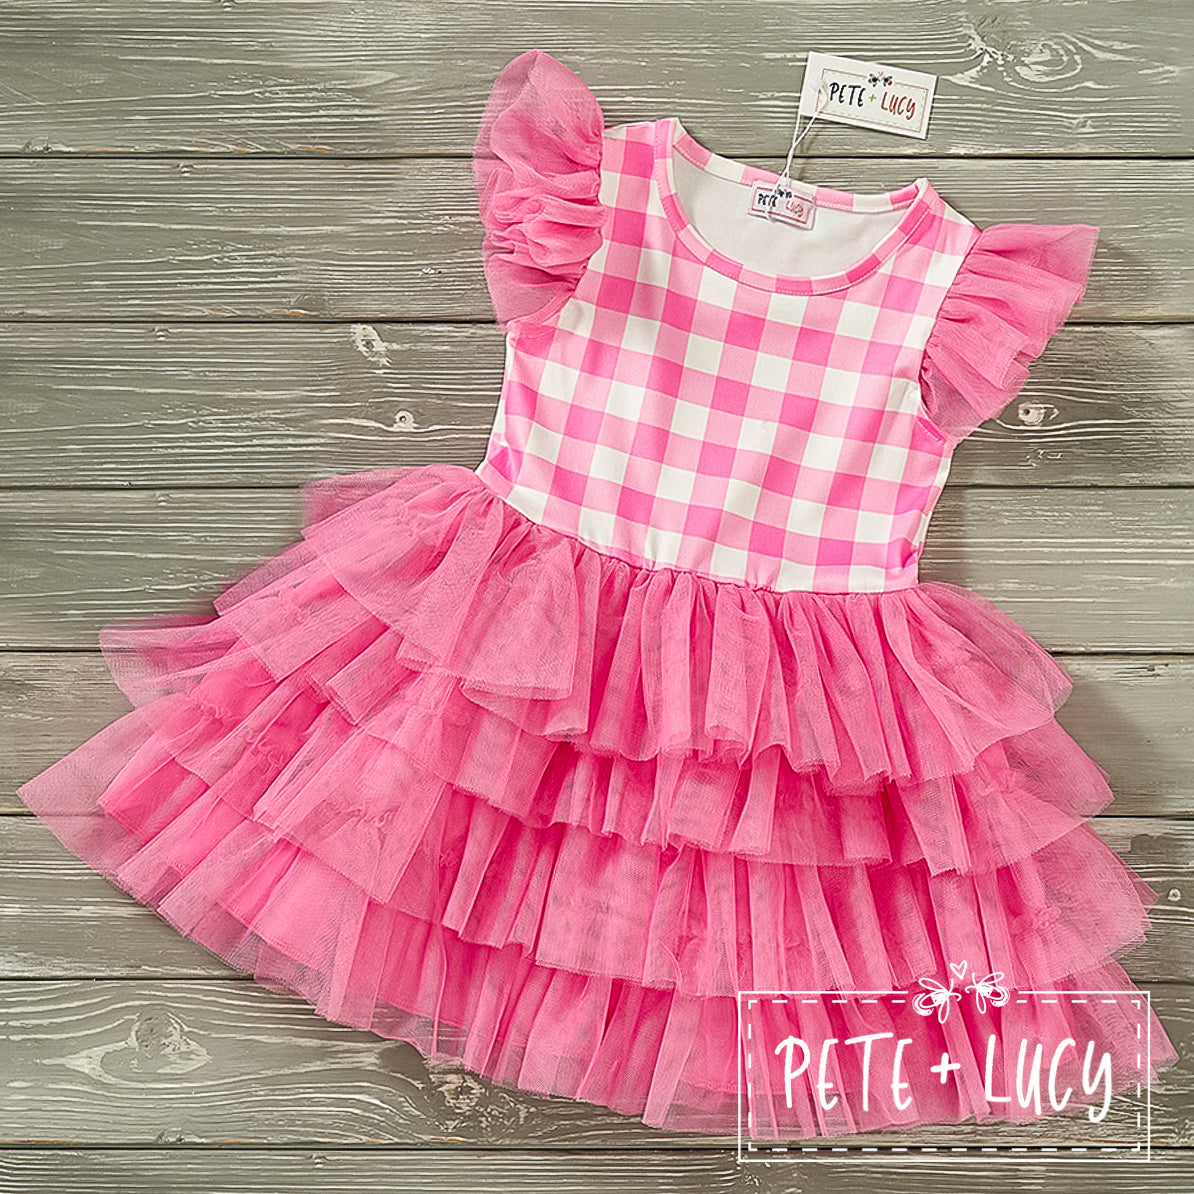 Princess Tulle: Pink Tulle Dress